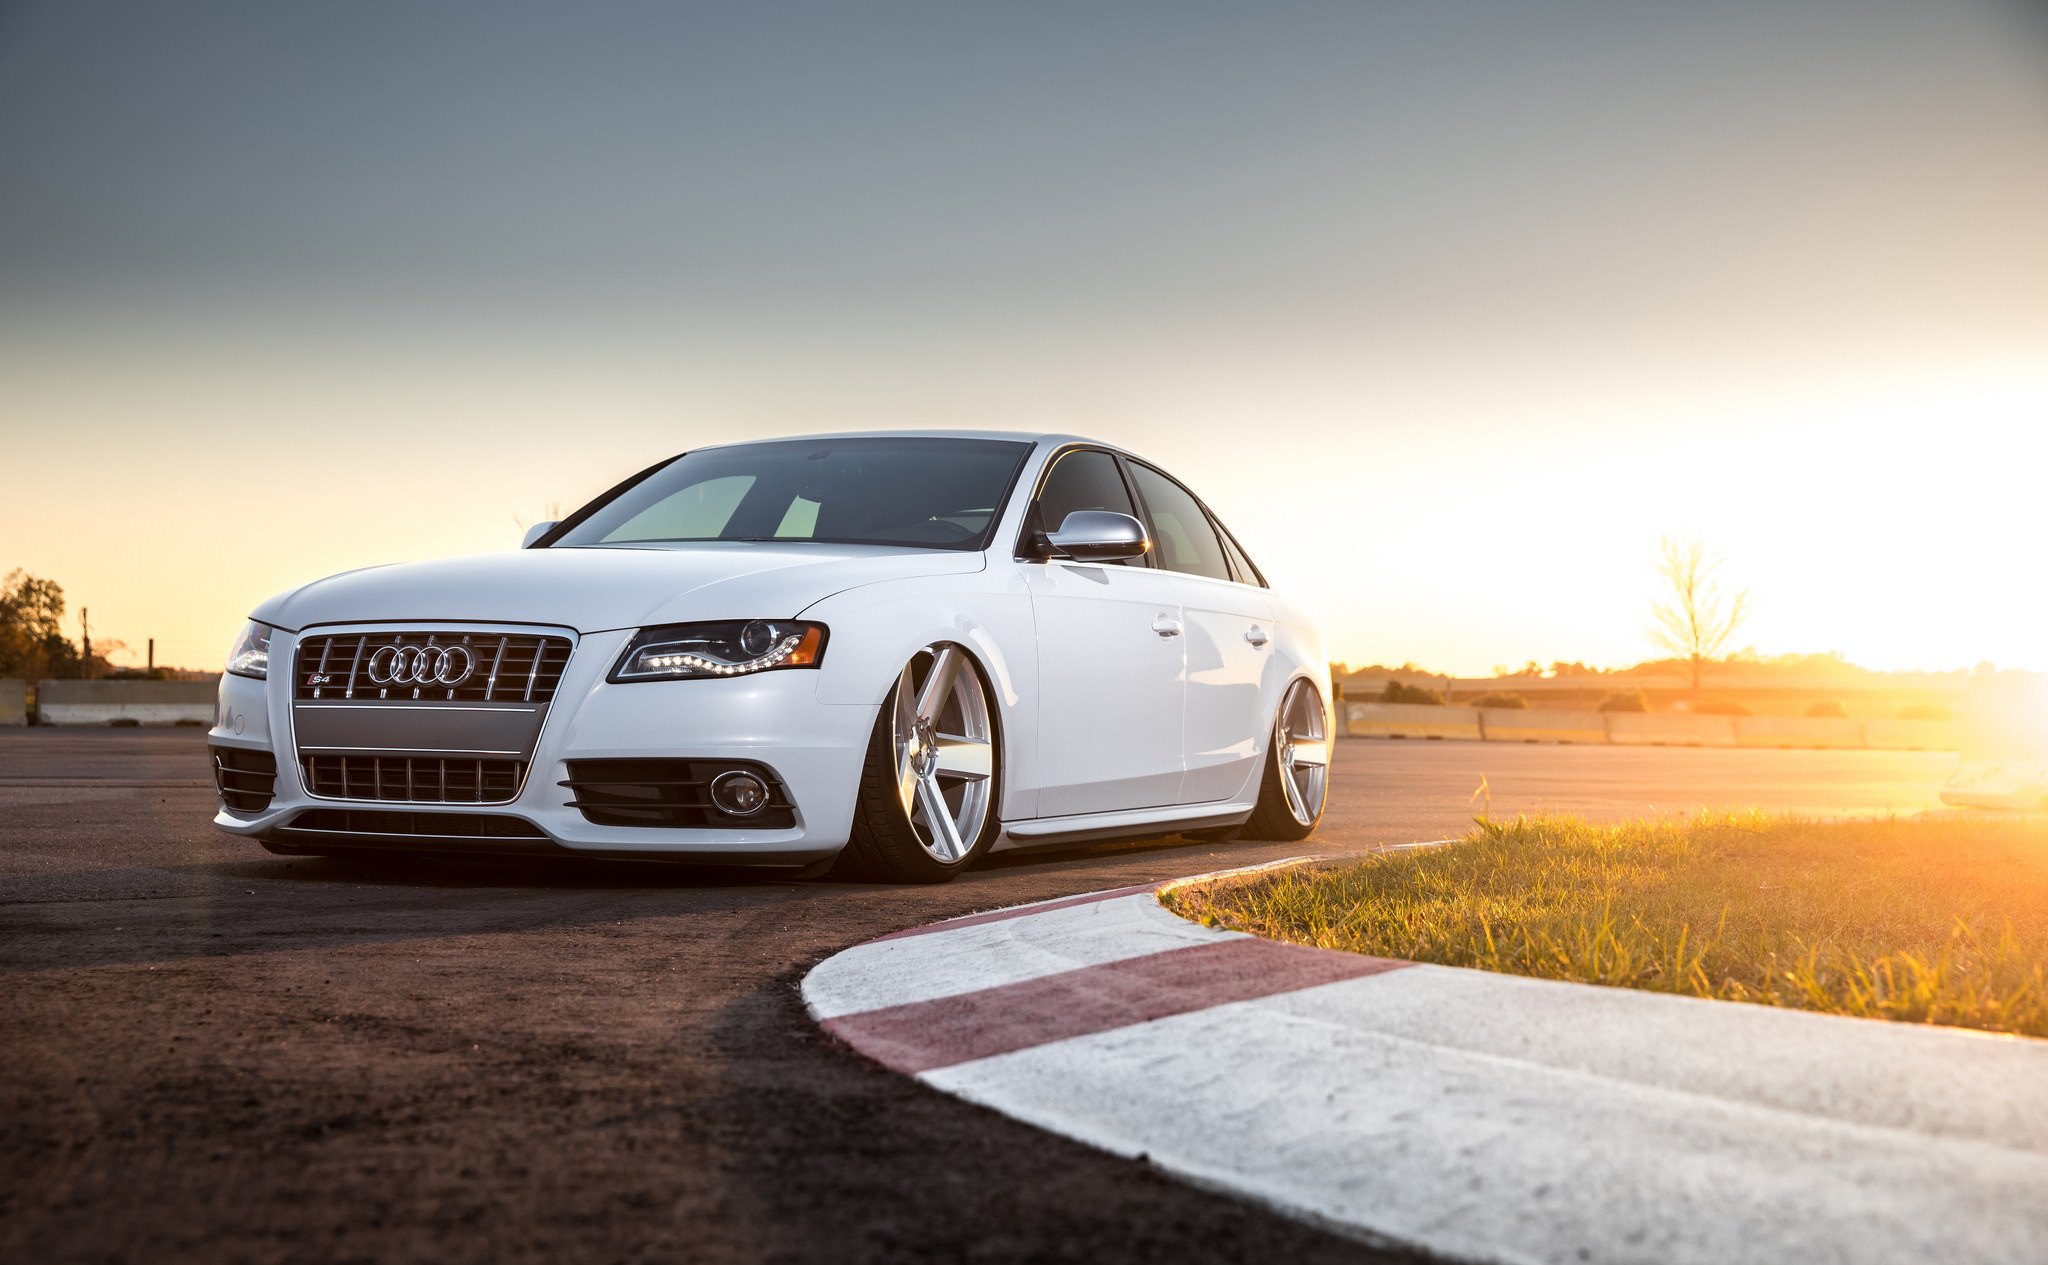 Aftermarket Side Mirrors on White Audi S4 - Photo by TSW